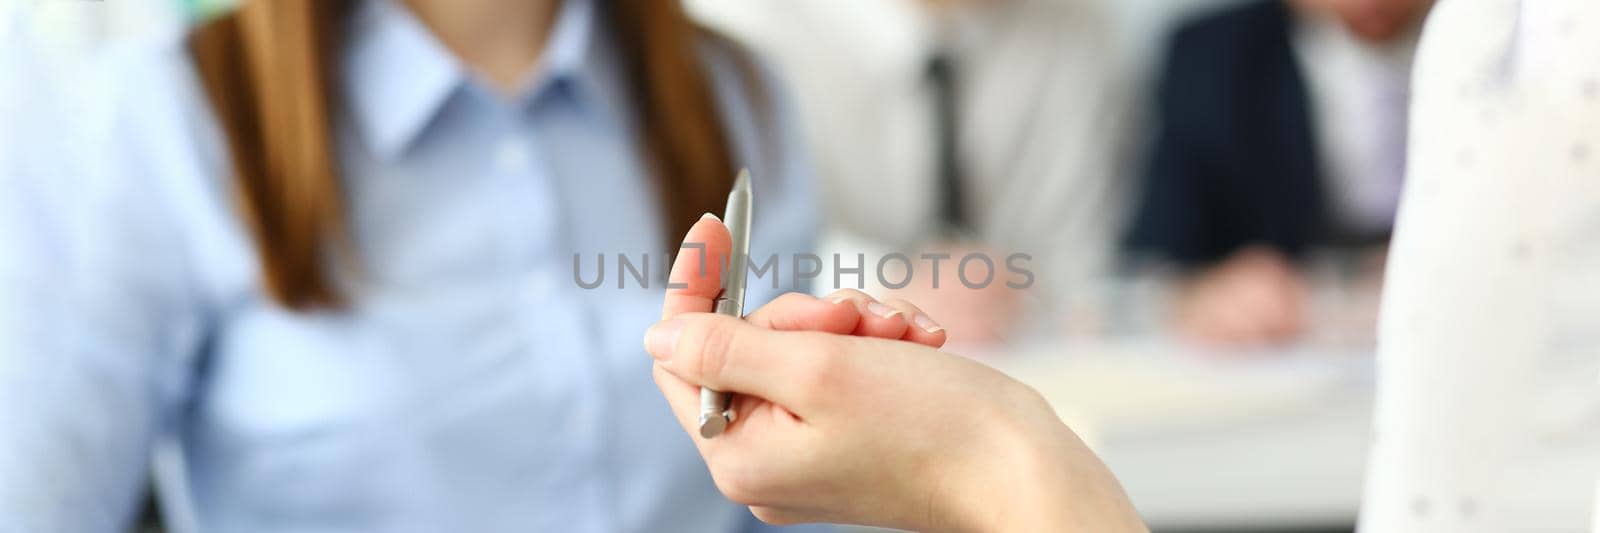 Focus on beautiful woman arm holding writing pen. Pretty female in classy blouse talking with friendly colleagues about important business project. Company meeting concept